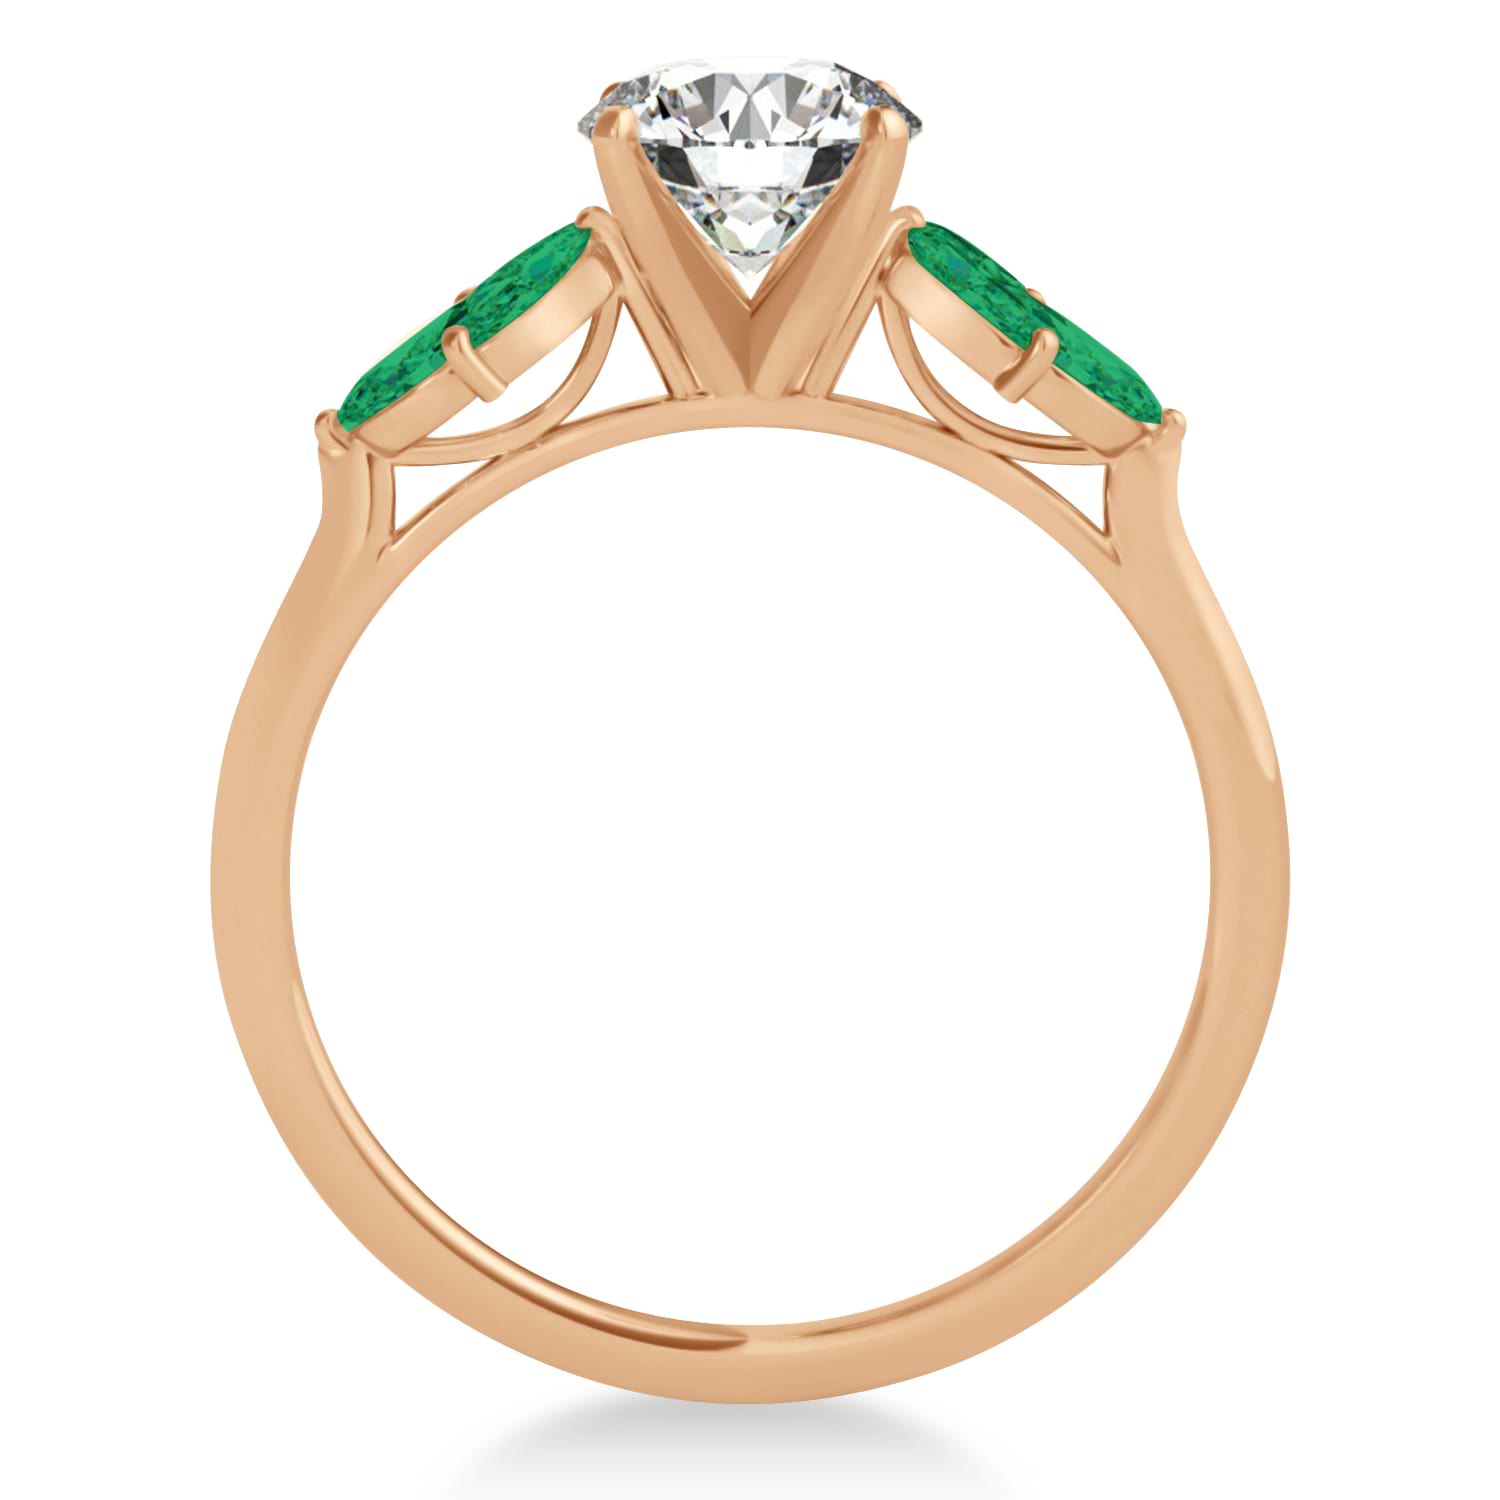 Emerald Marquise Floral Engagement Ring 14k Rose Gold (0.50ct)